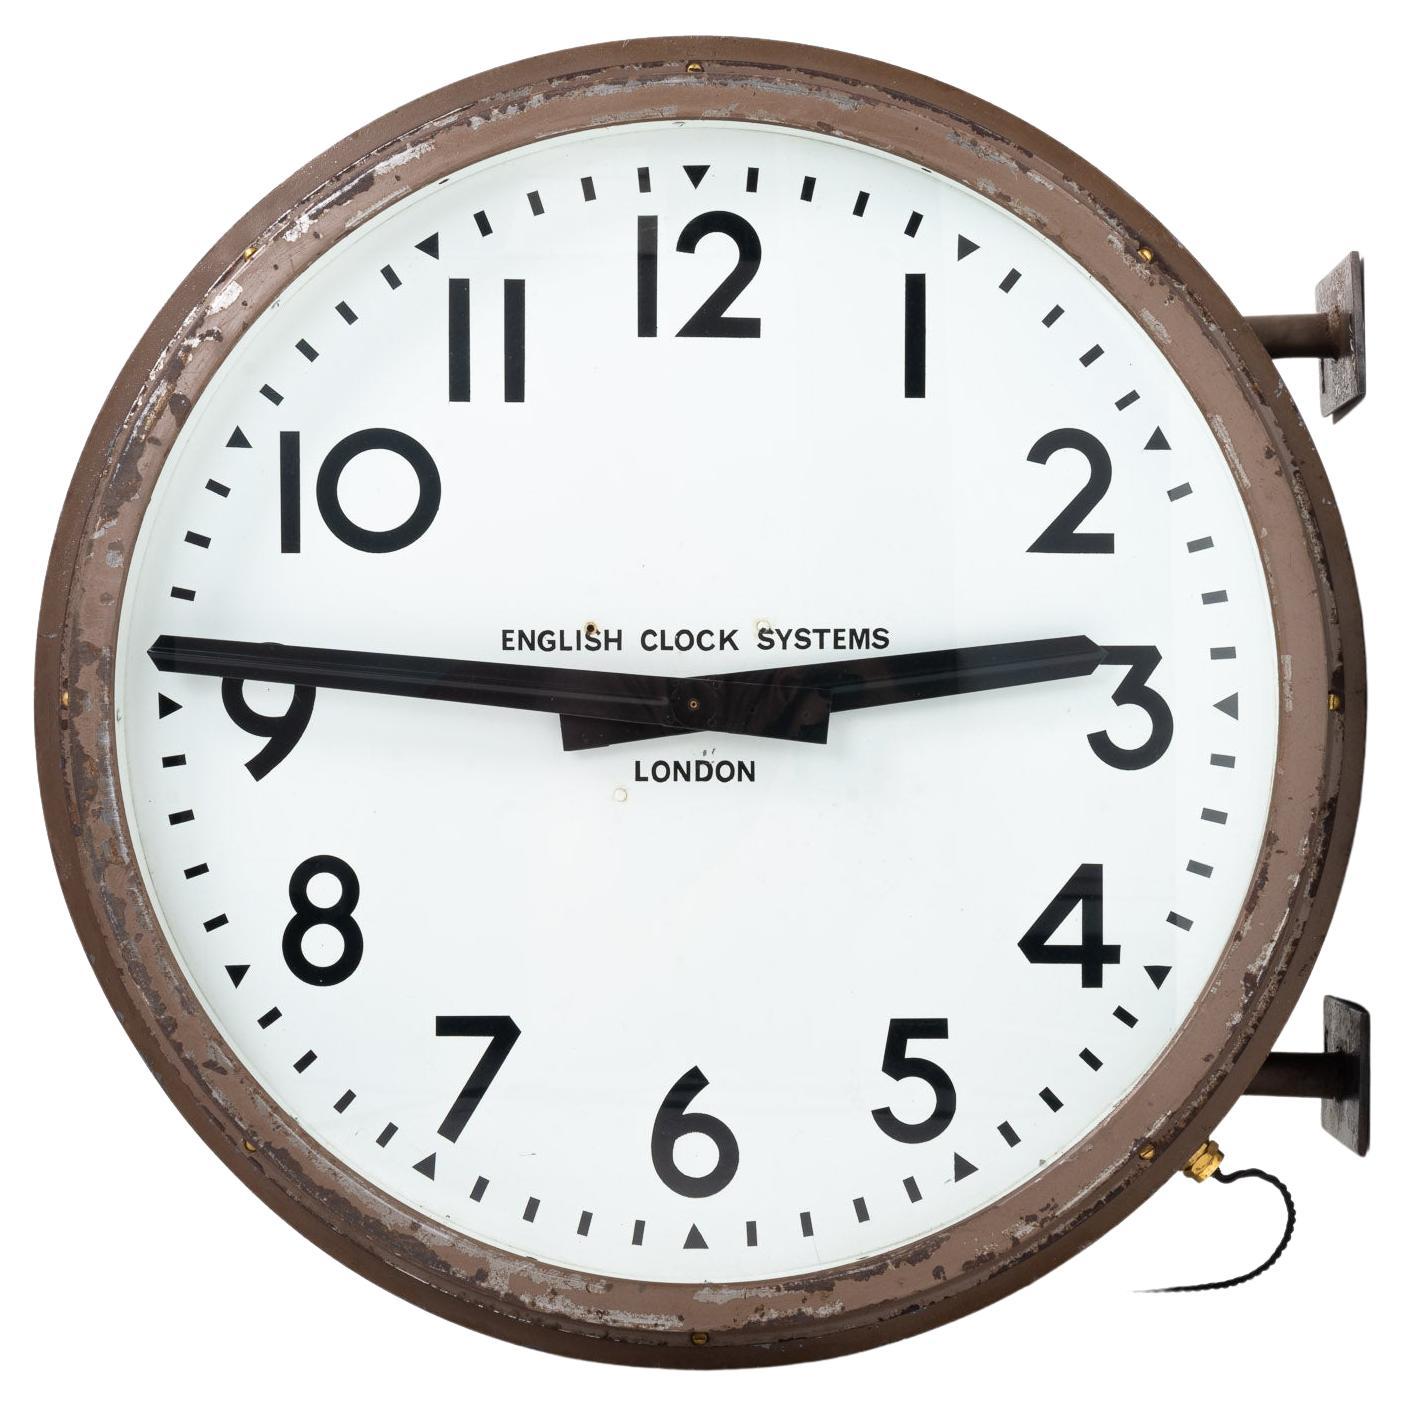 Huge Double Sided Railway Clock by English Clock Systems